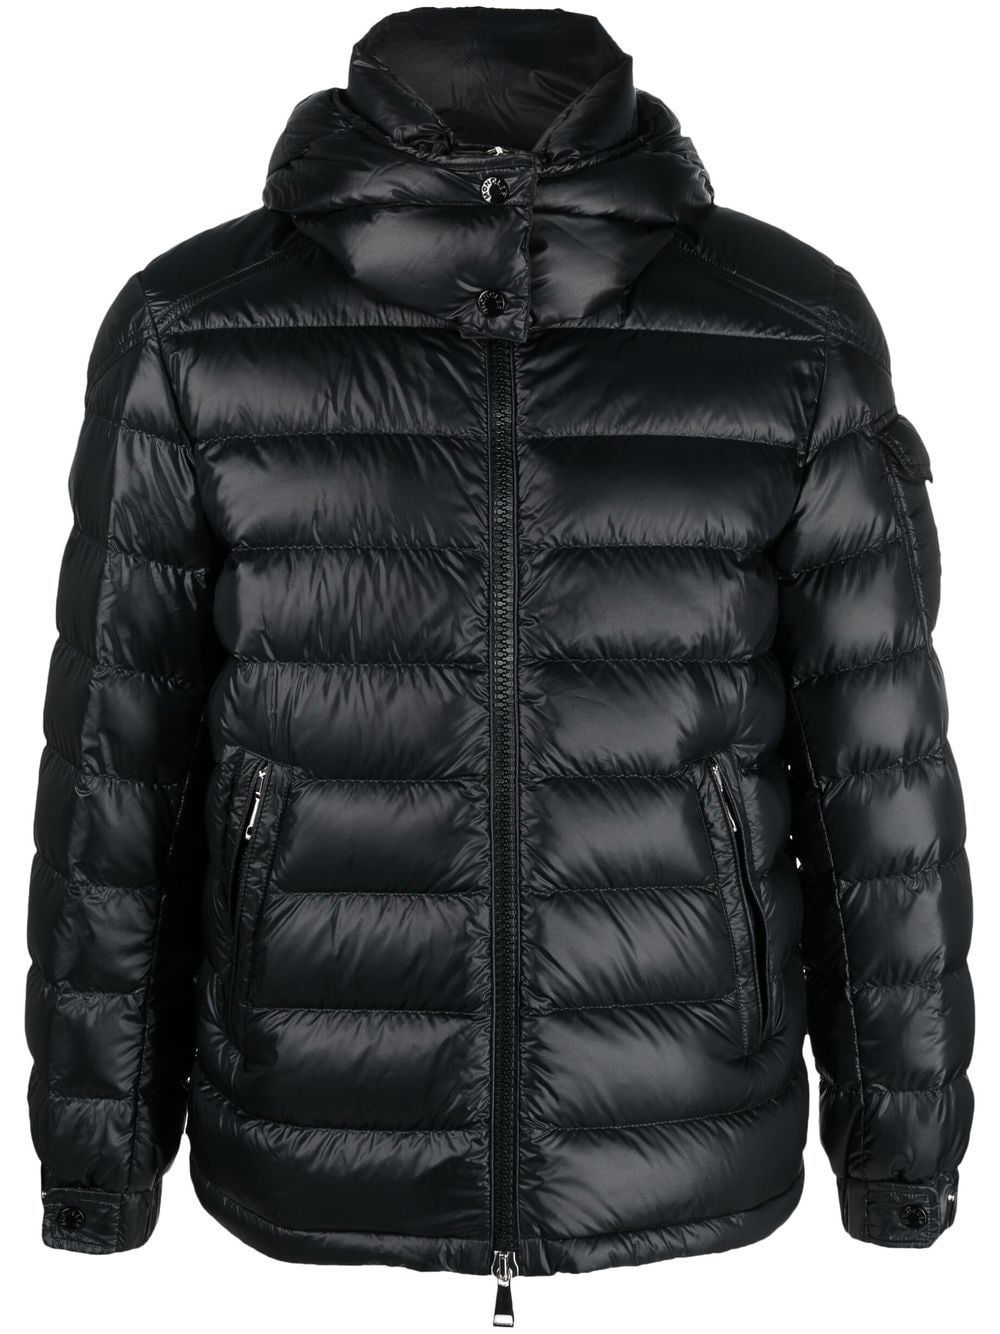 Dalles puffer jacket - 1